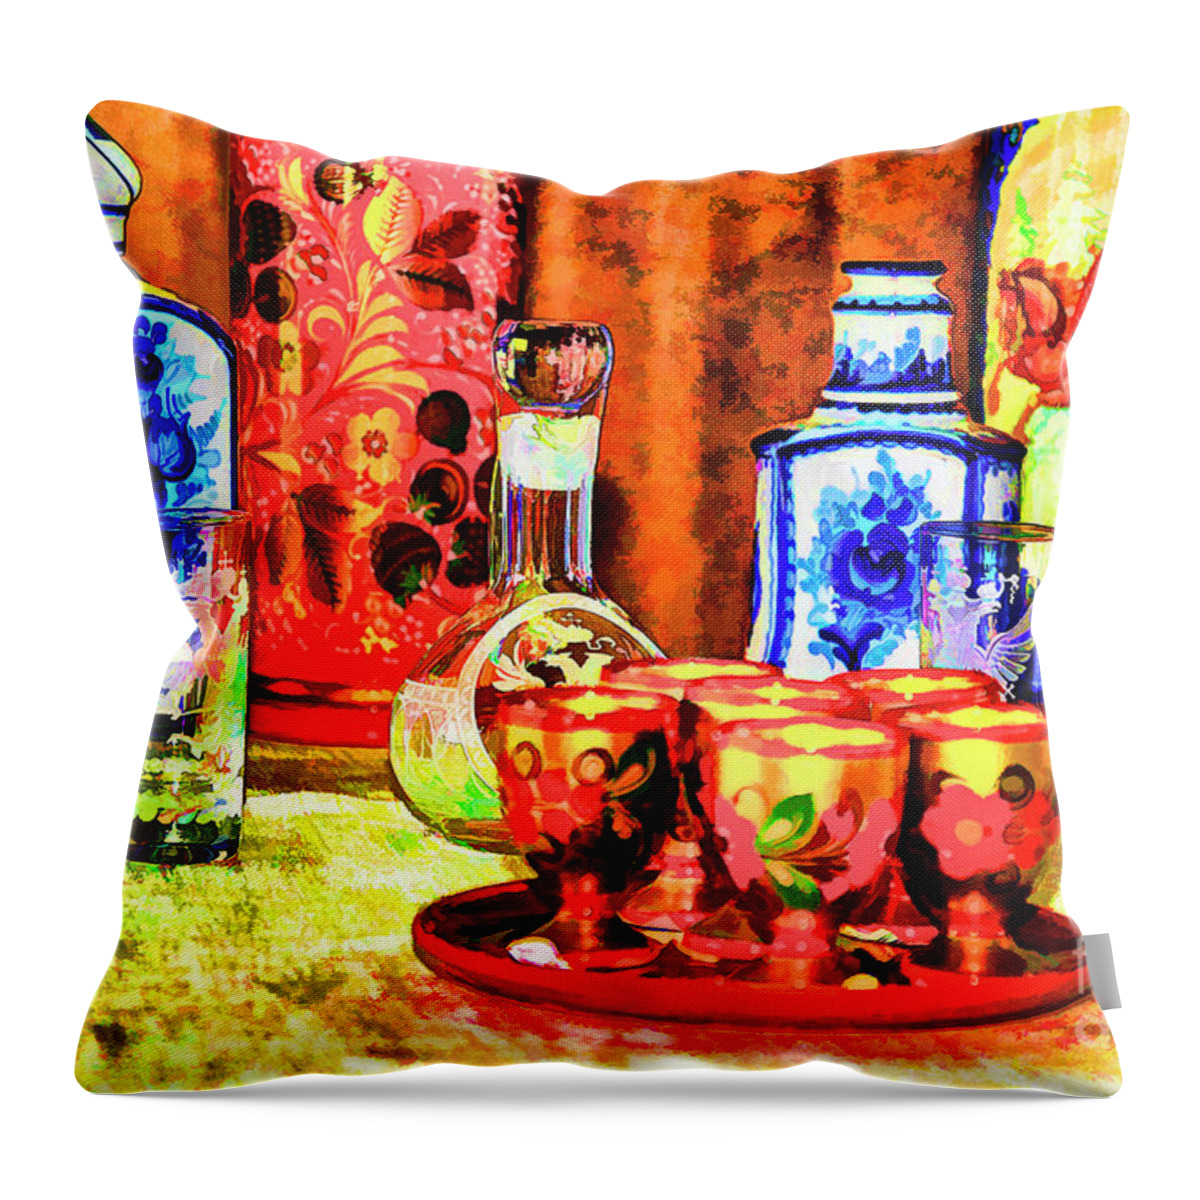 Glassware Throw Pillow featuring the photograph Russian Glassware by Rick Bragan